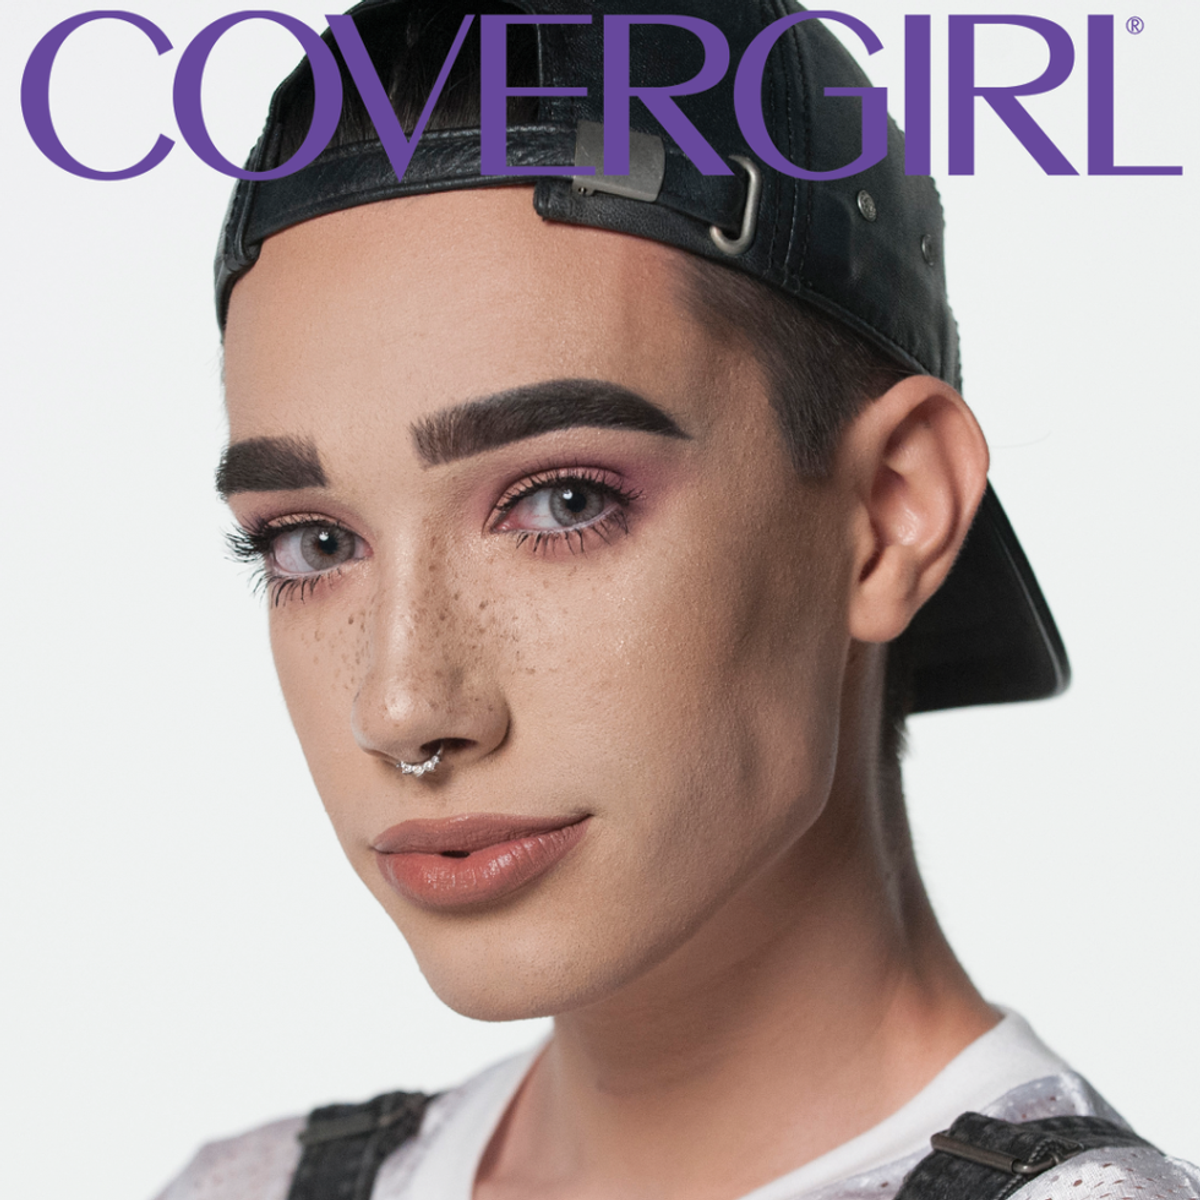 James Charles: The New Covergirl